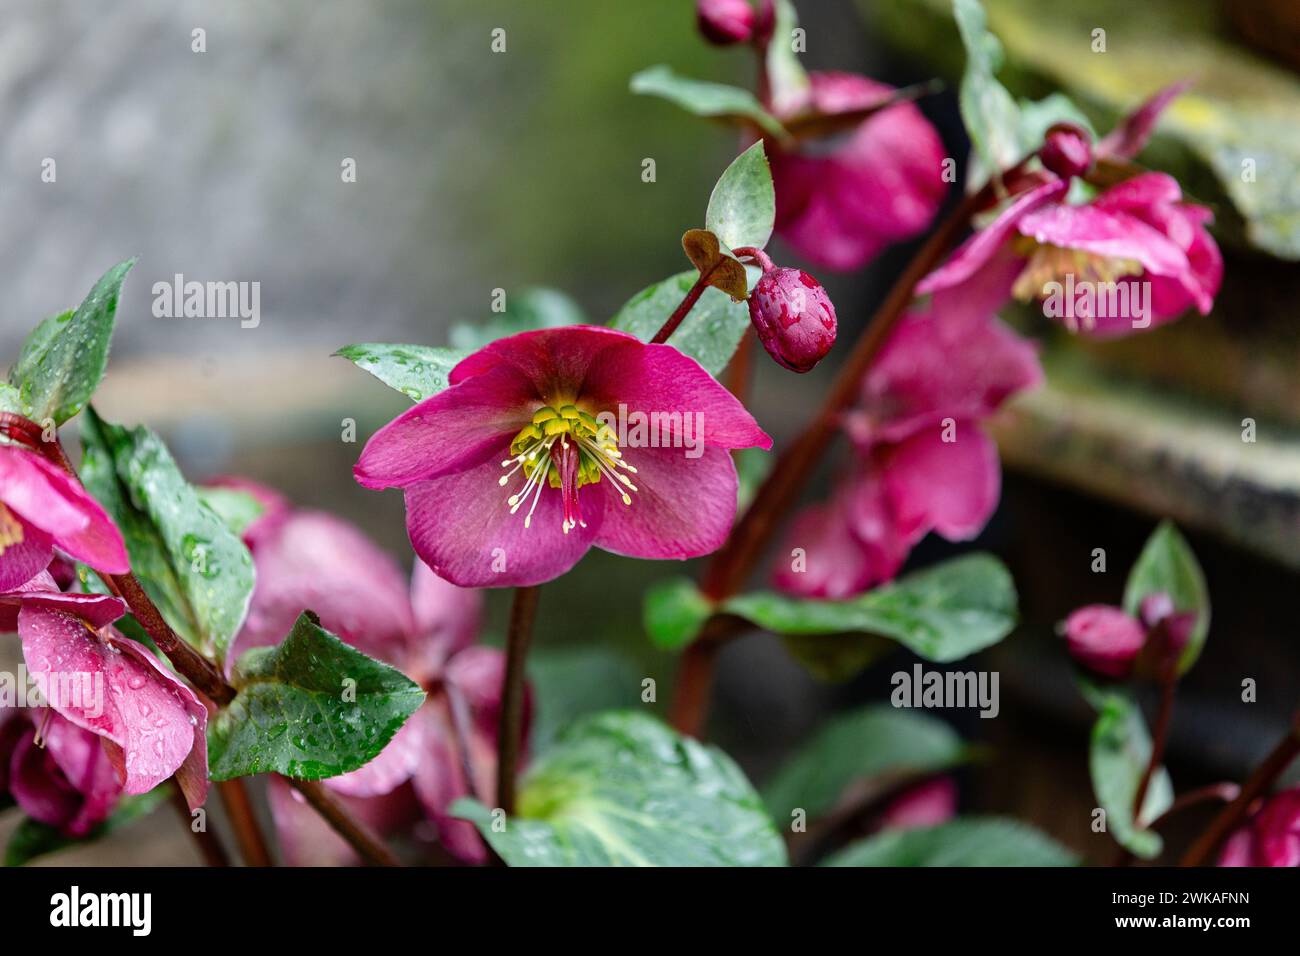 Helleborus Ice 'n' Roses Red. This deep pink winter flowering plant provides colour from January into March and April. Stock Photo